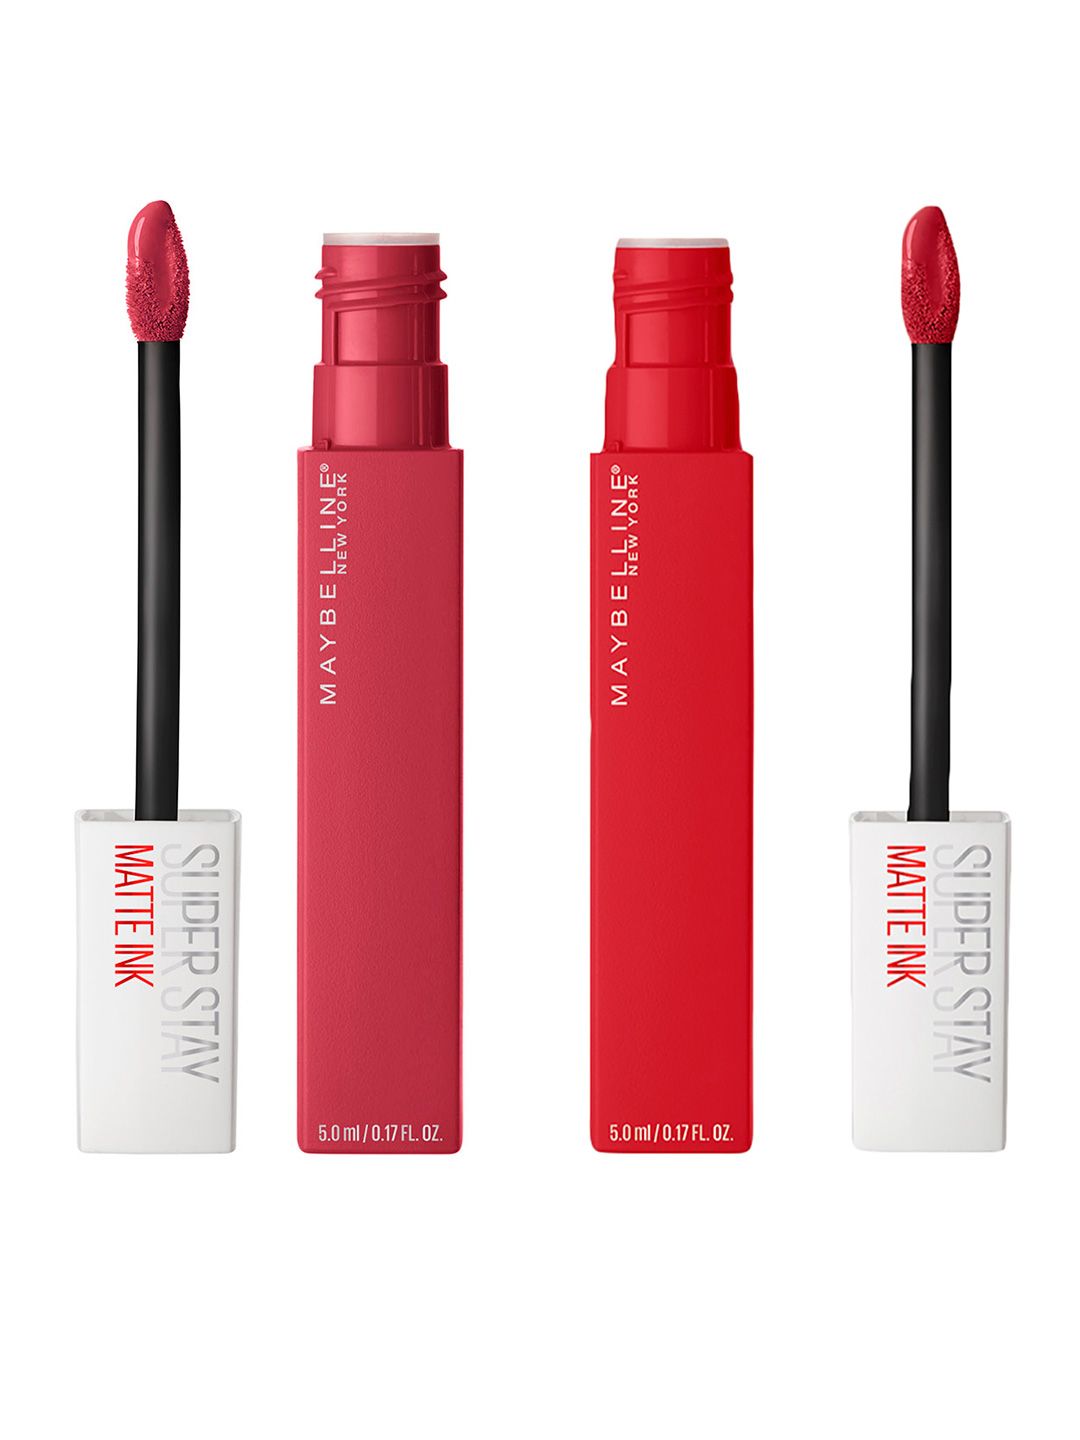 Maybelline Set of 2 New York Super Stay Matte Ink Liquid Lipsticks - Ambitious & Ruler Price in India